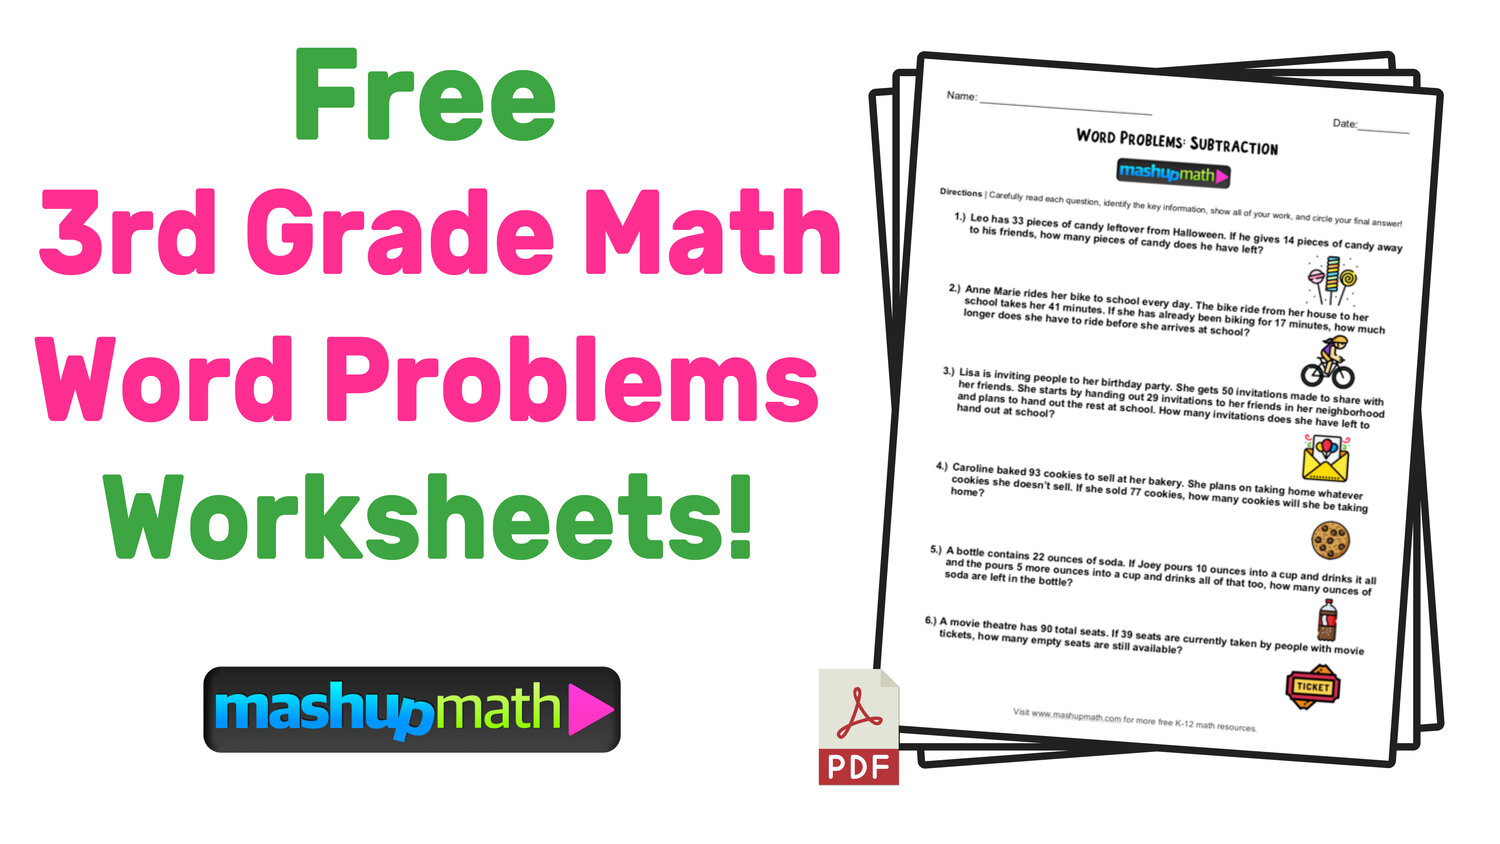 3rd-grade-math-word-problems-free-worksheets-with-answers-mashup-math